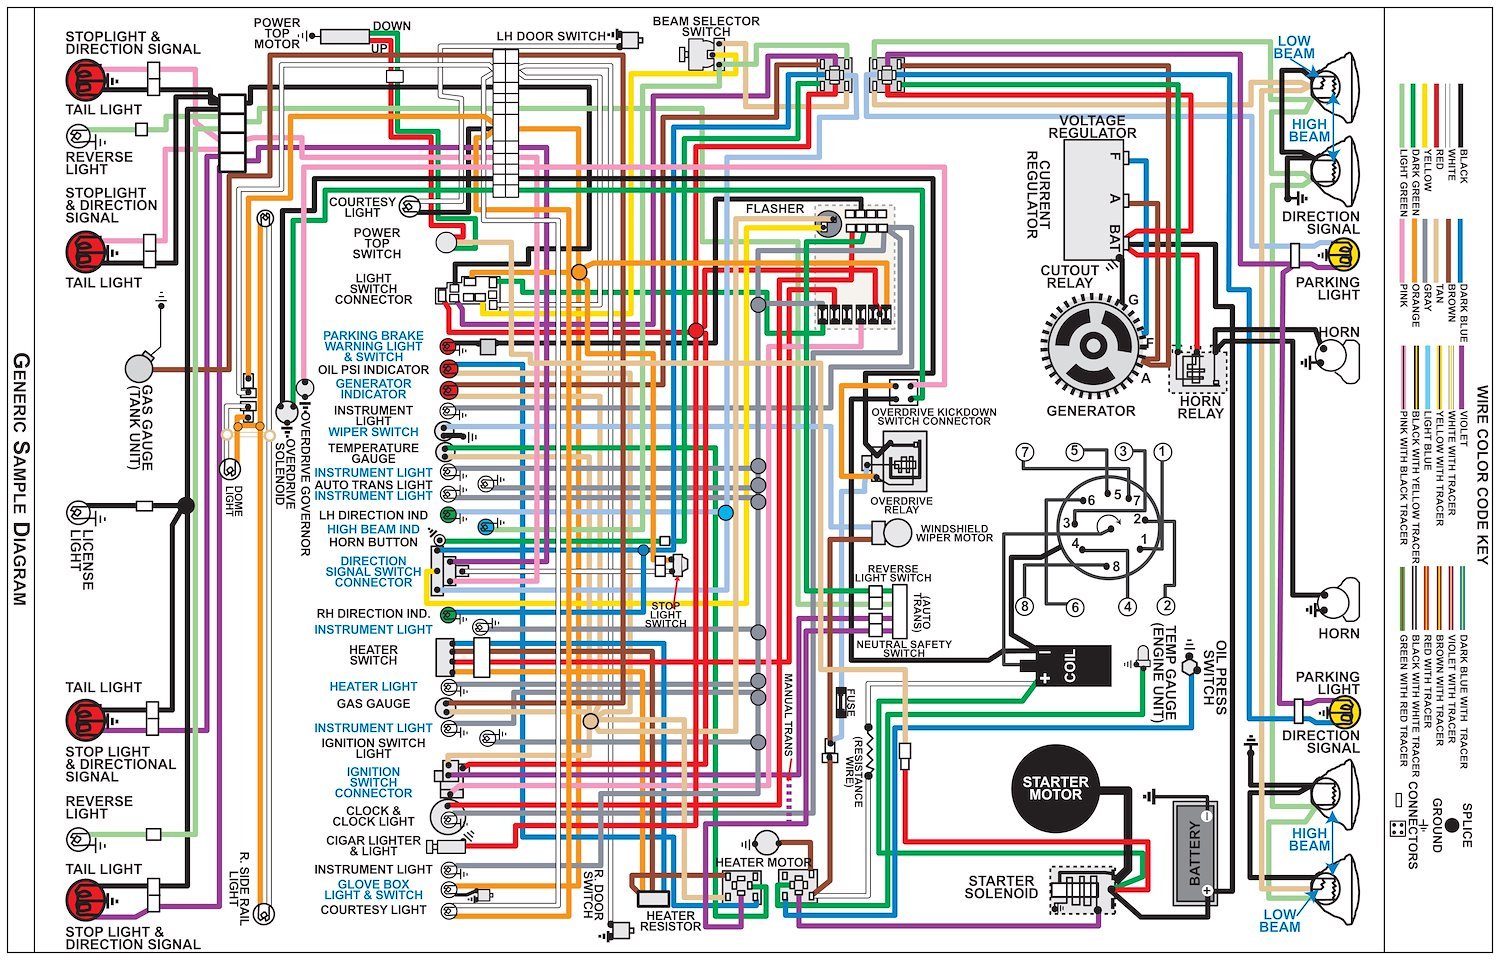 Wiring Diagram for 1971 Dodge Challenger with Rallye Dash (Non HEMI), 11 in x 17 in., Laminated